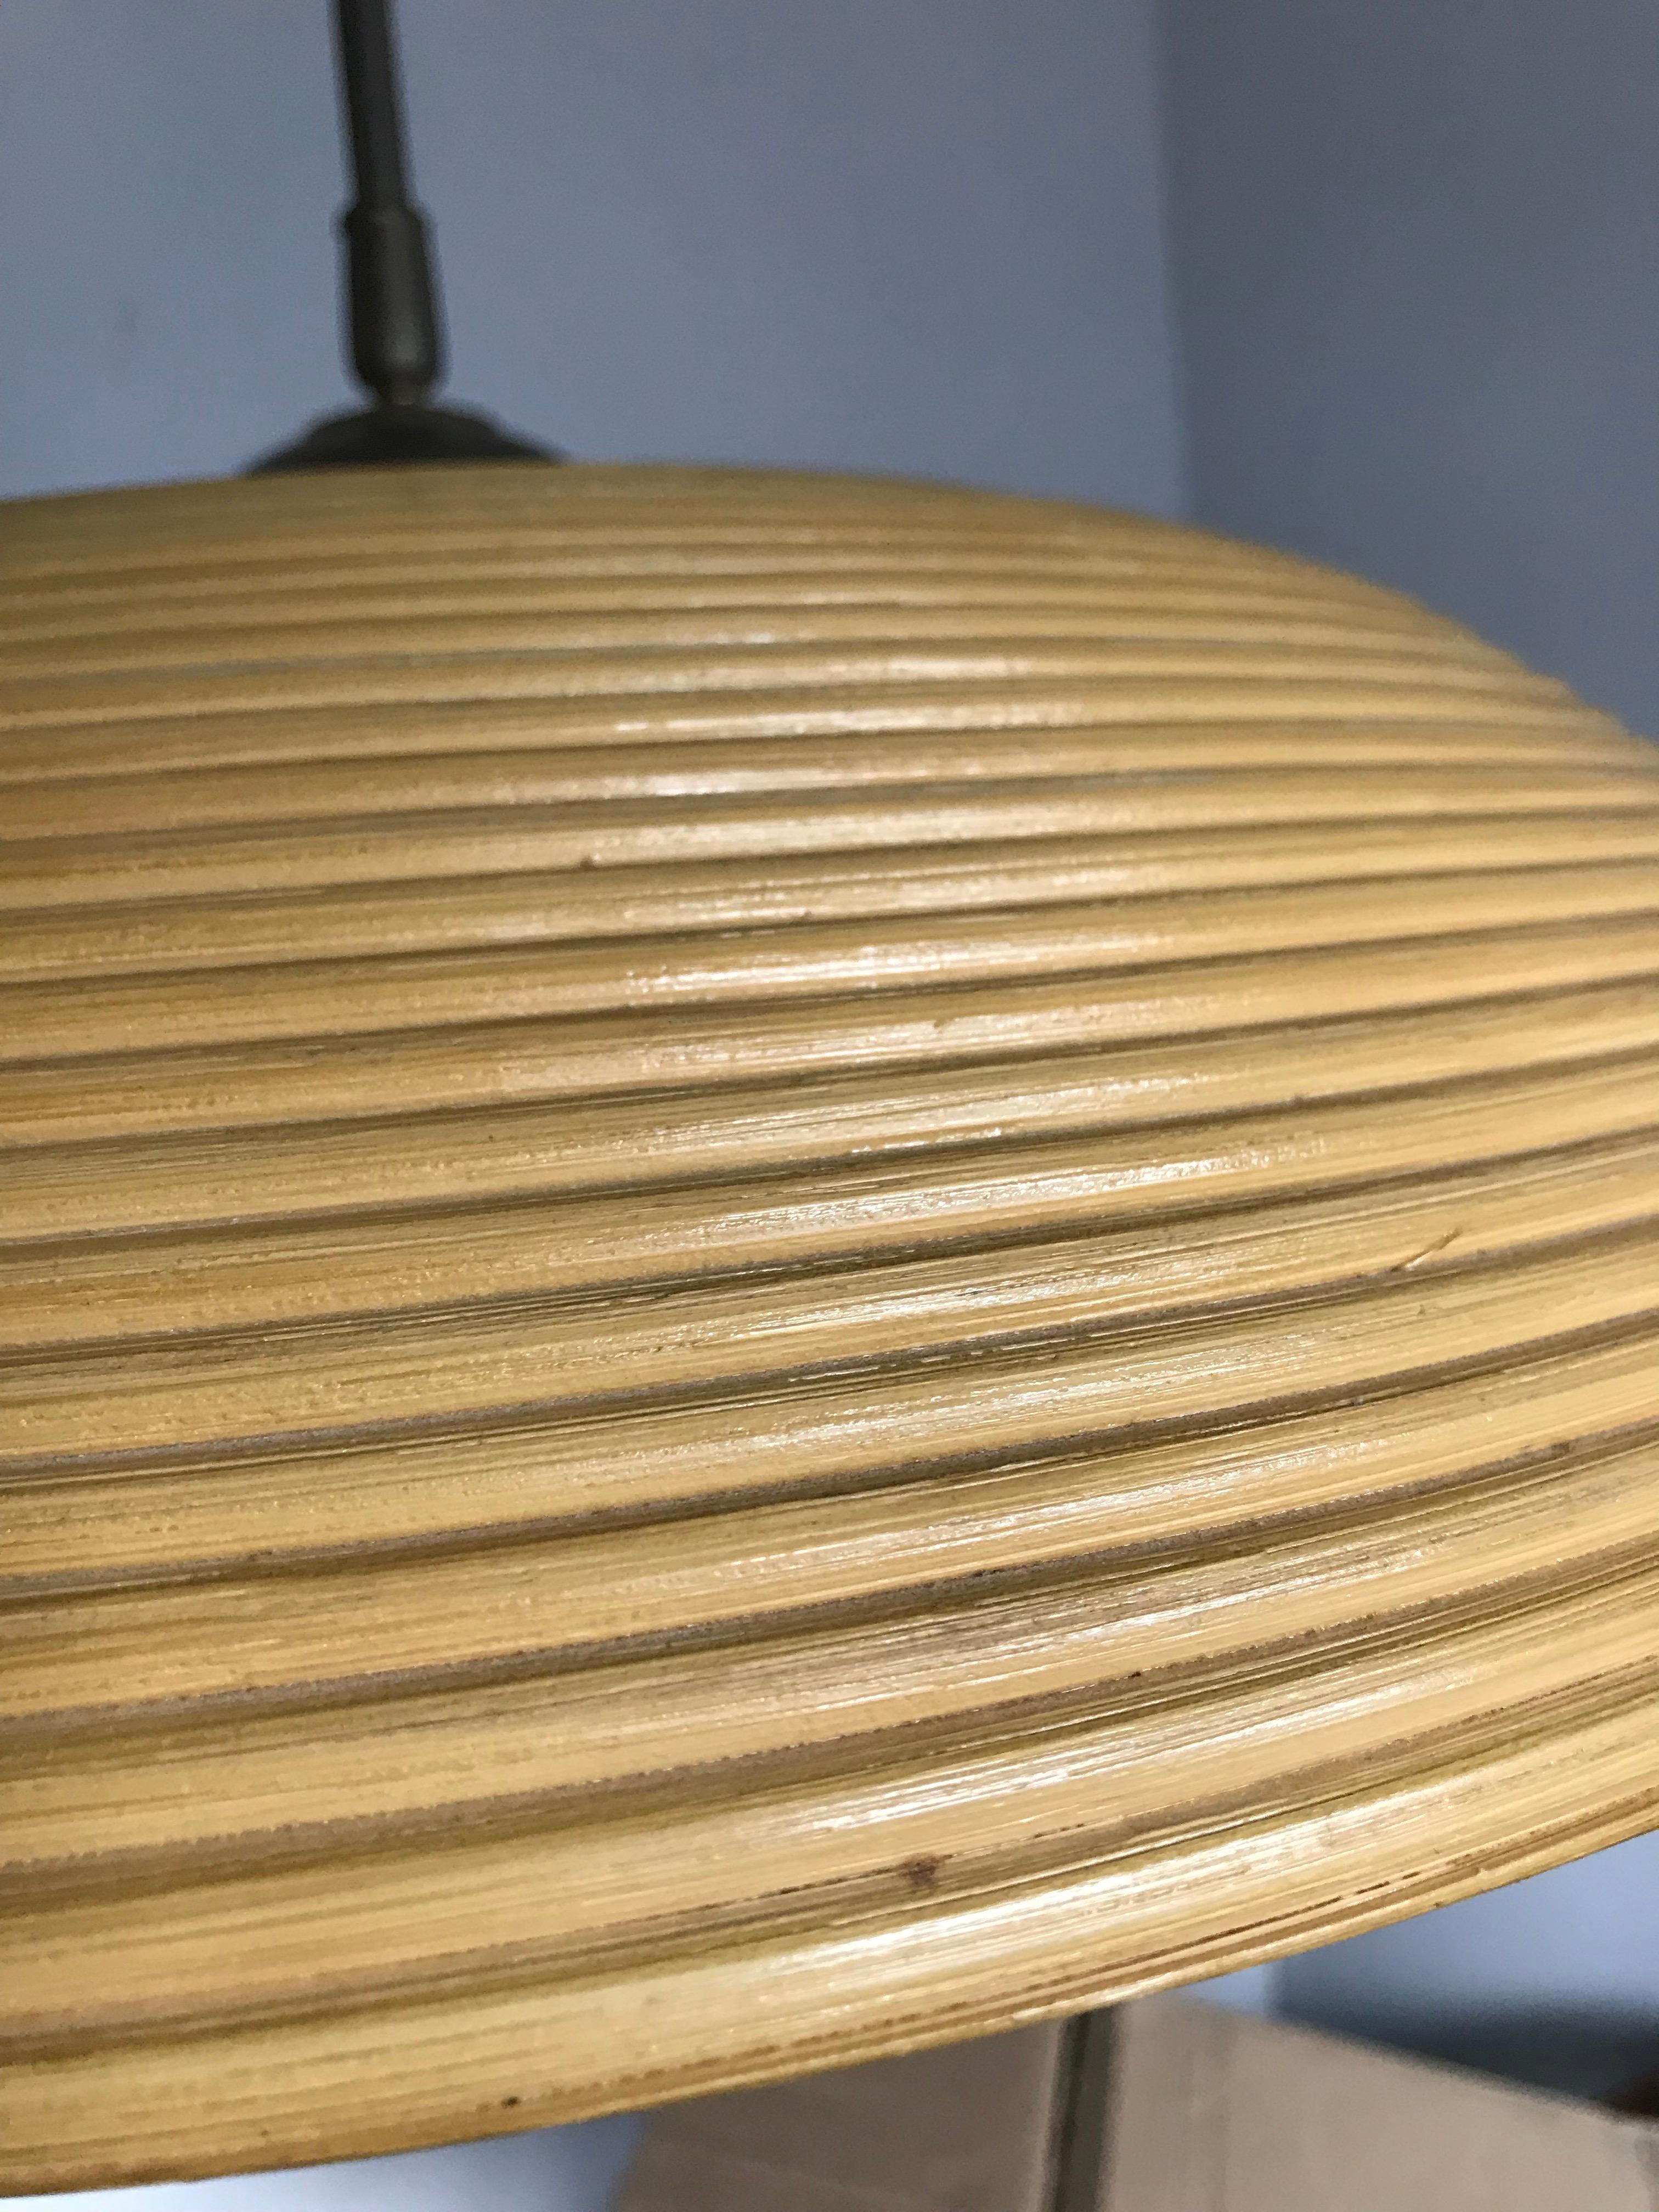 20th Century Rare and Handcrafted Mid-Century Modern Rattan and Brass Pendant Light, Lamp